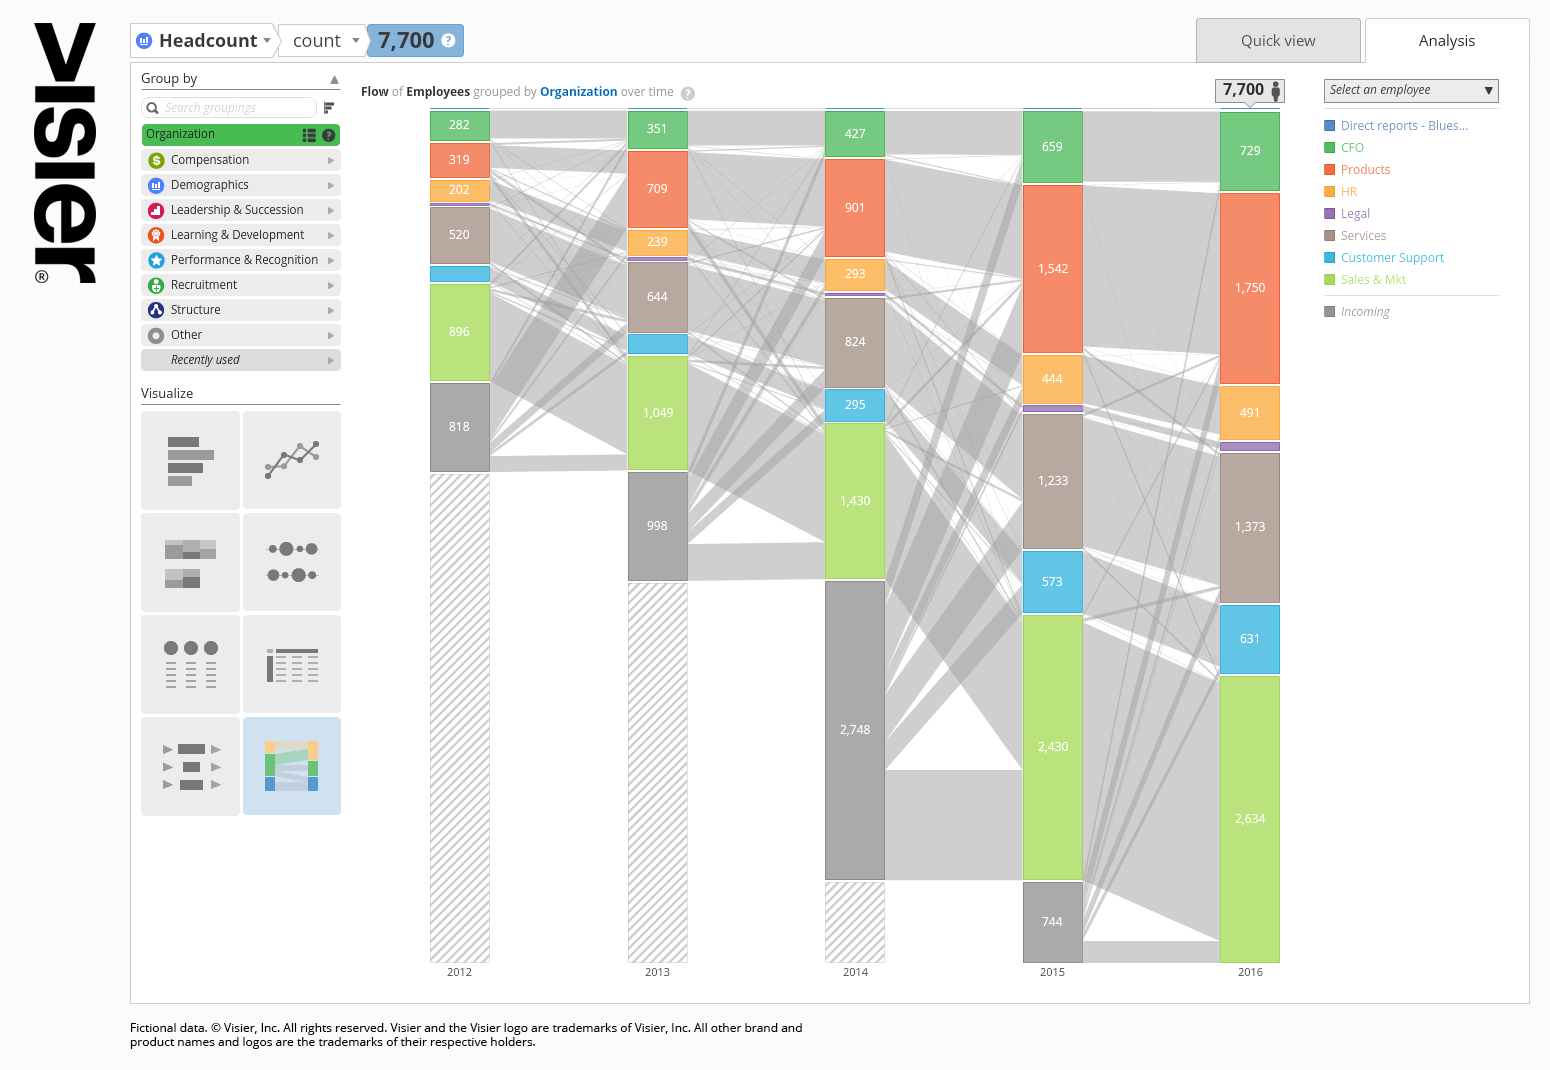 Data visualization of succession planning and movement through an organization